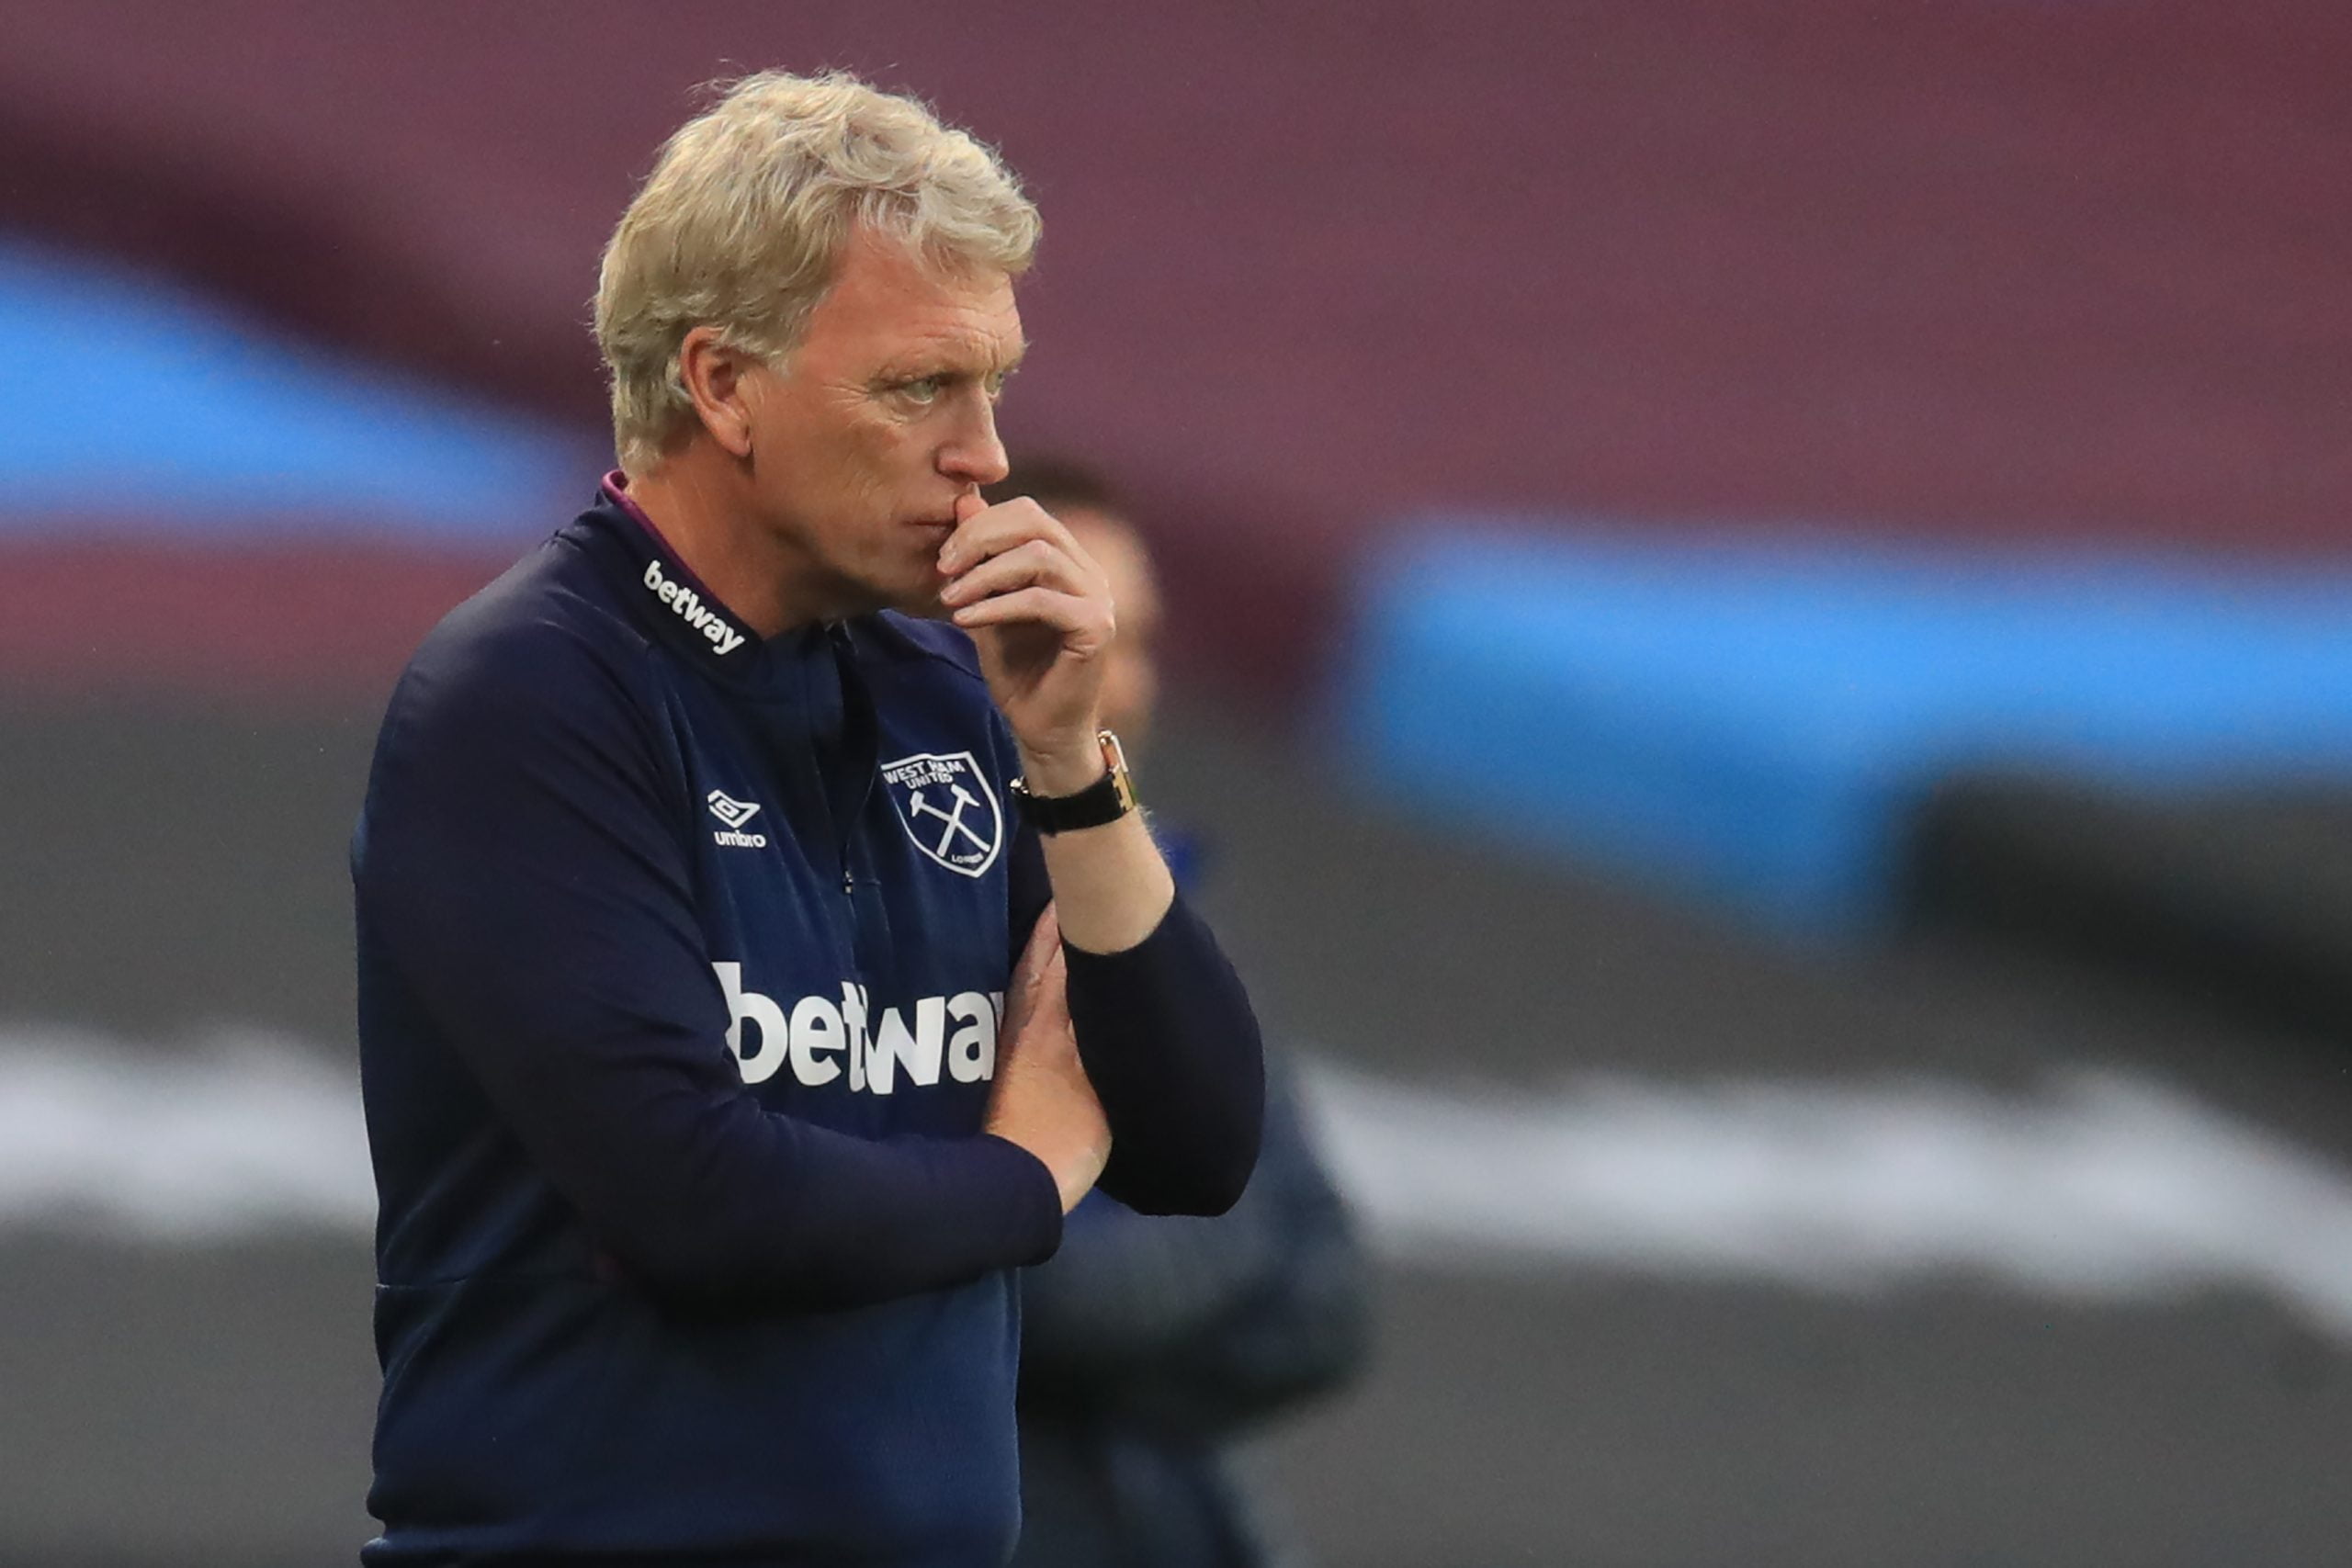 West Ham United wants to land Darius Olaru this month (West Ham boss David Moyes is seen in the picture)